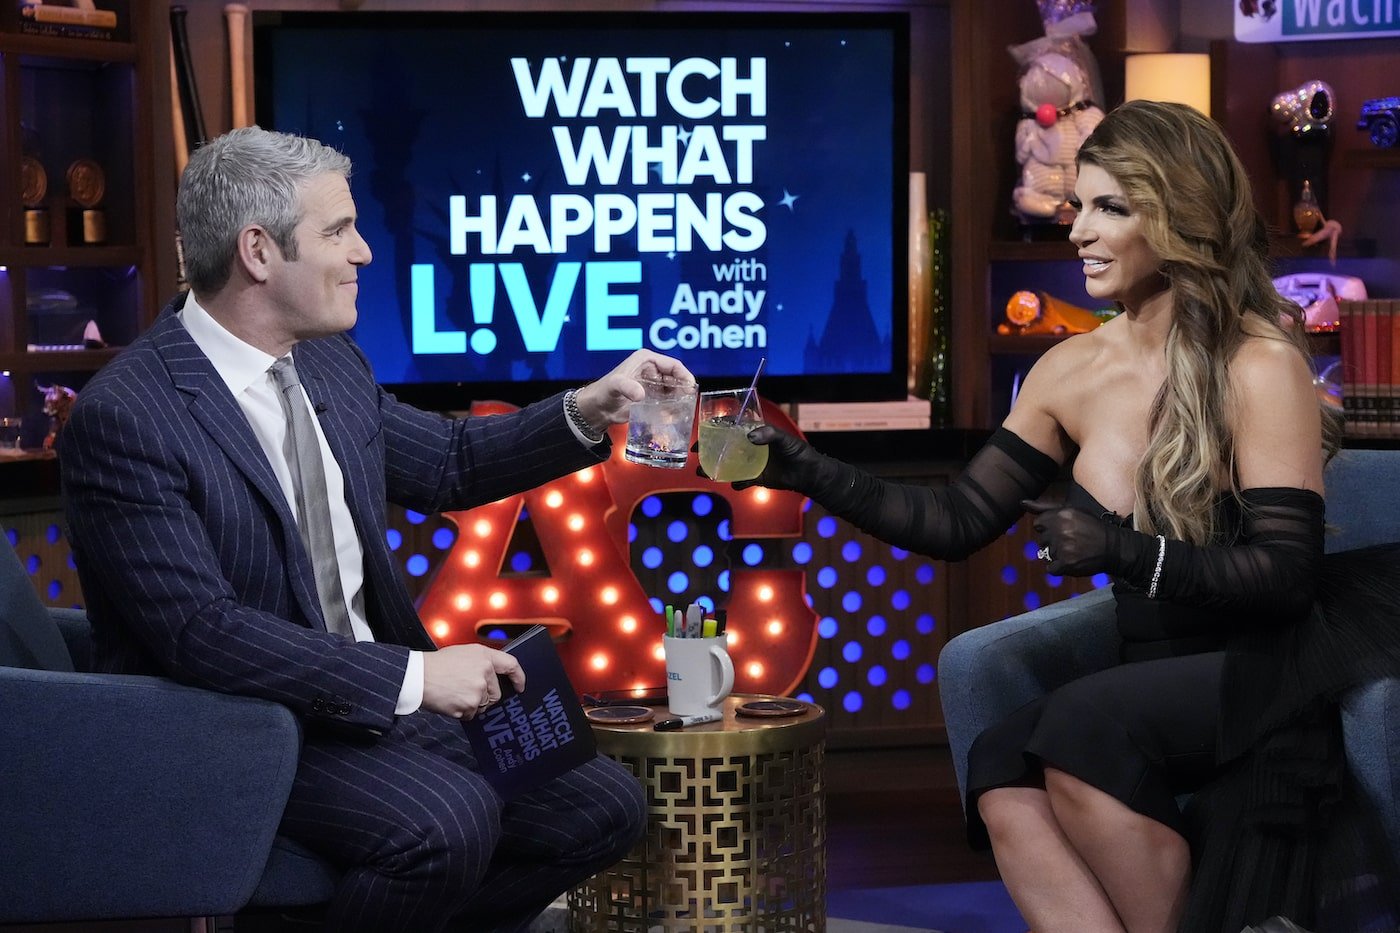 Andy Cohen and Teresa Giudice from 'RHONJ' toast on 'WWHL'